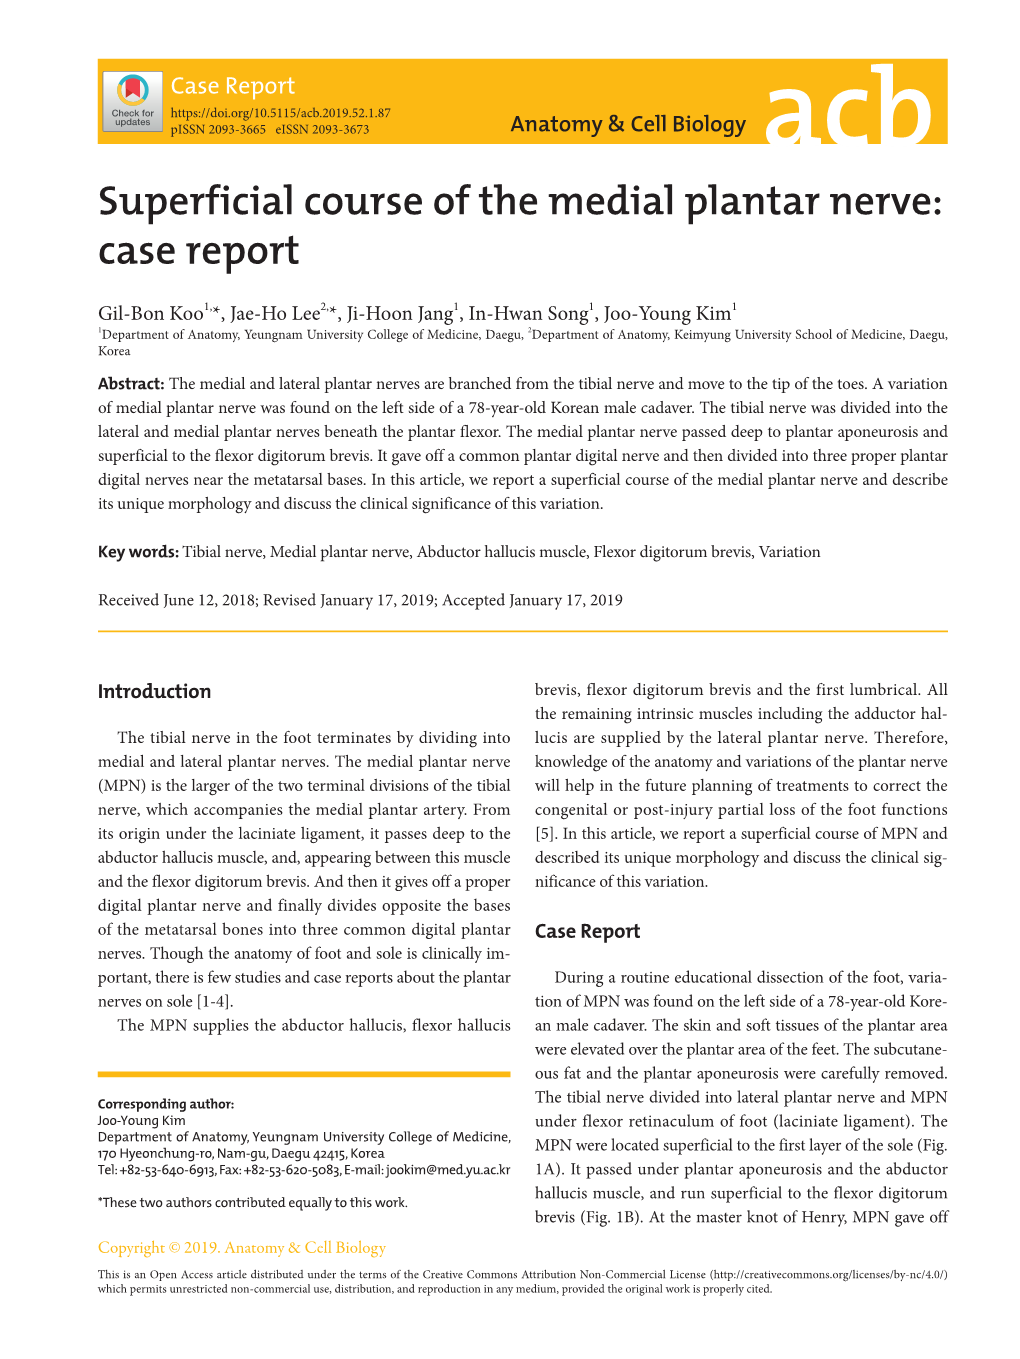 Superficial Course of the Medial Plantar Nerve: Case Report